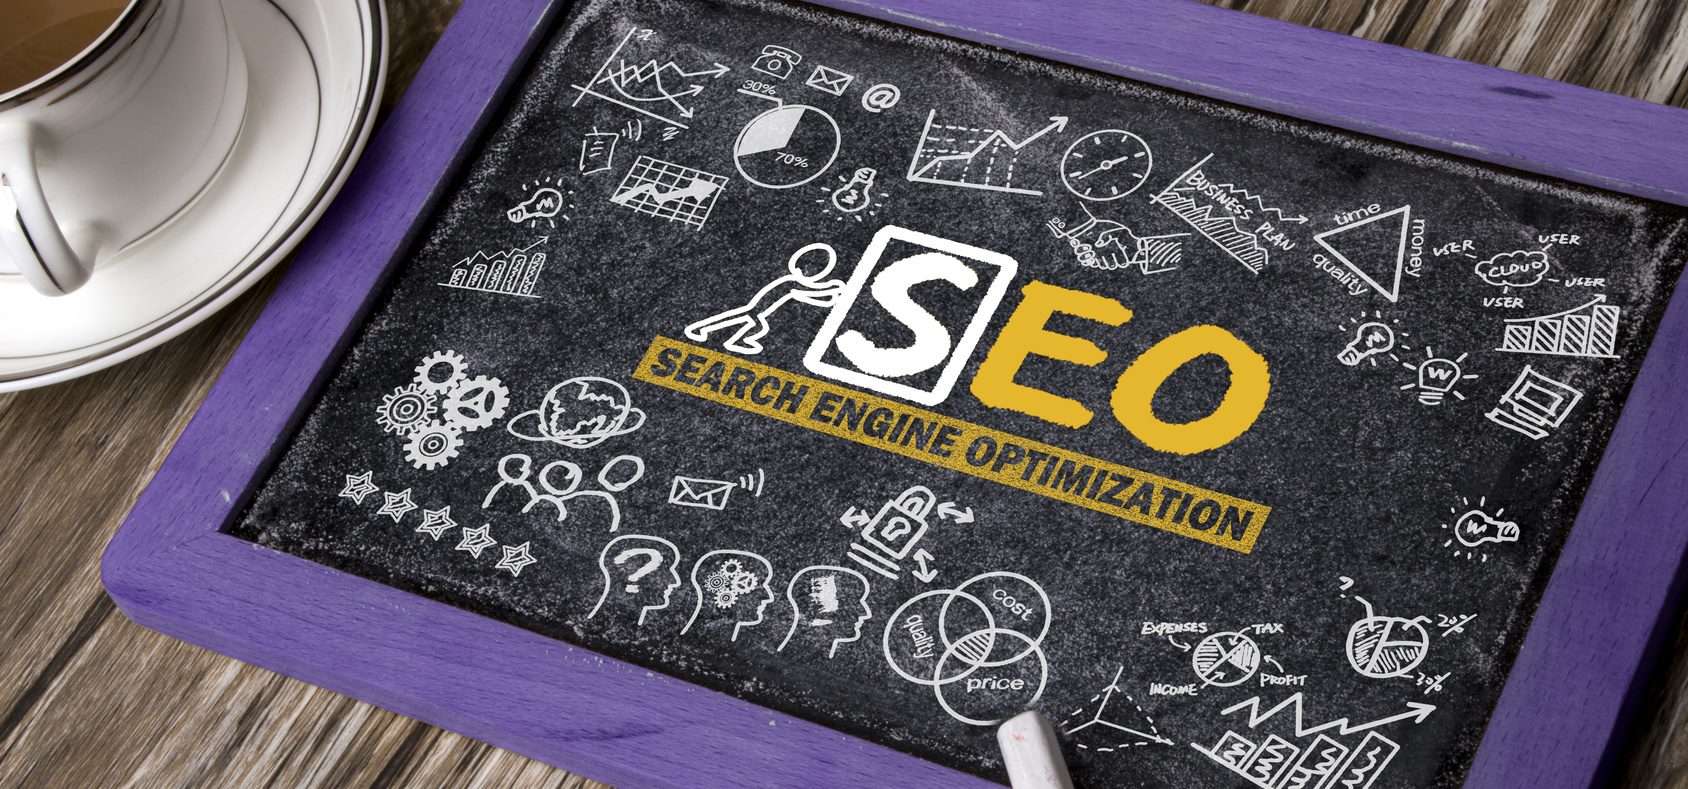 SEO Management: How to Optimize Your Site for Google